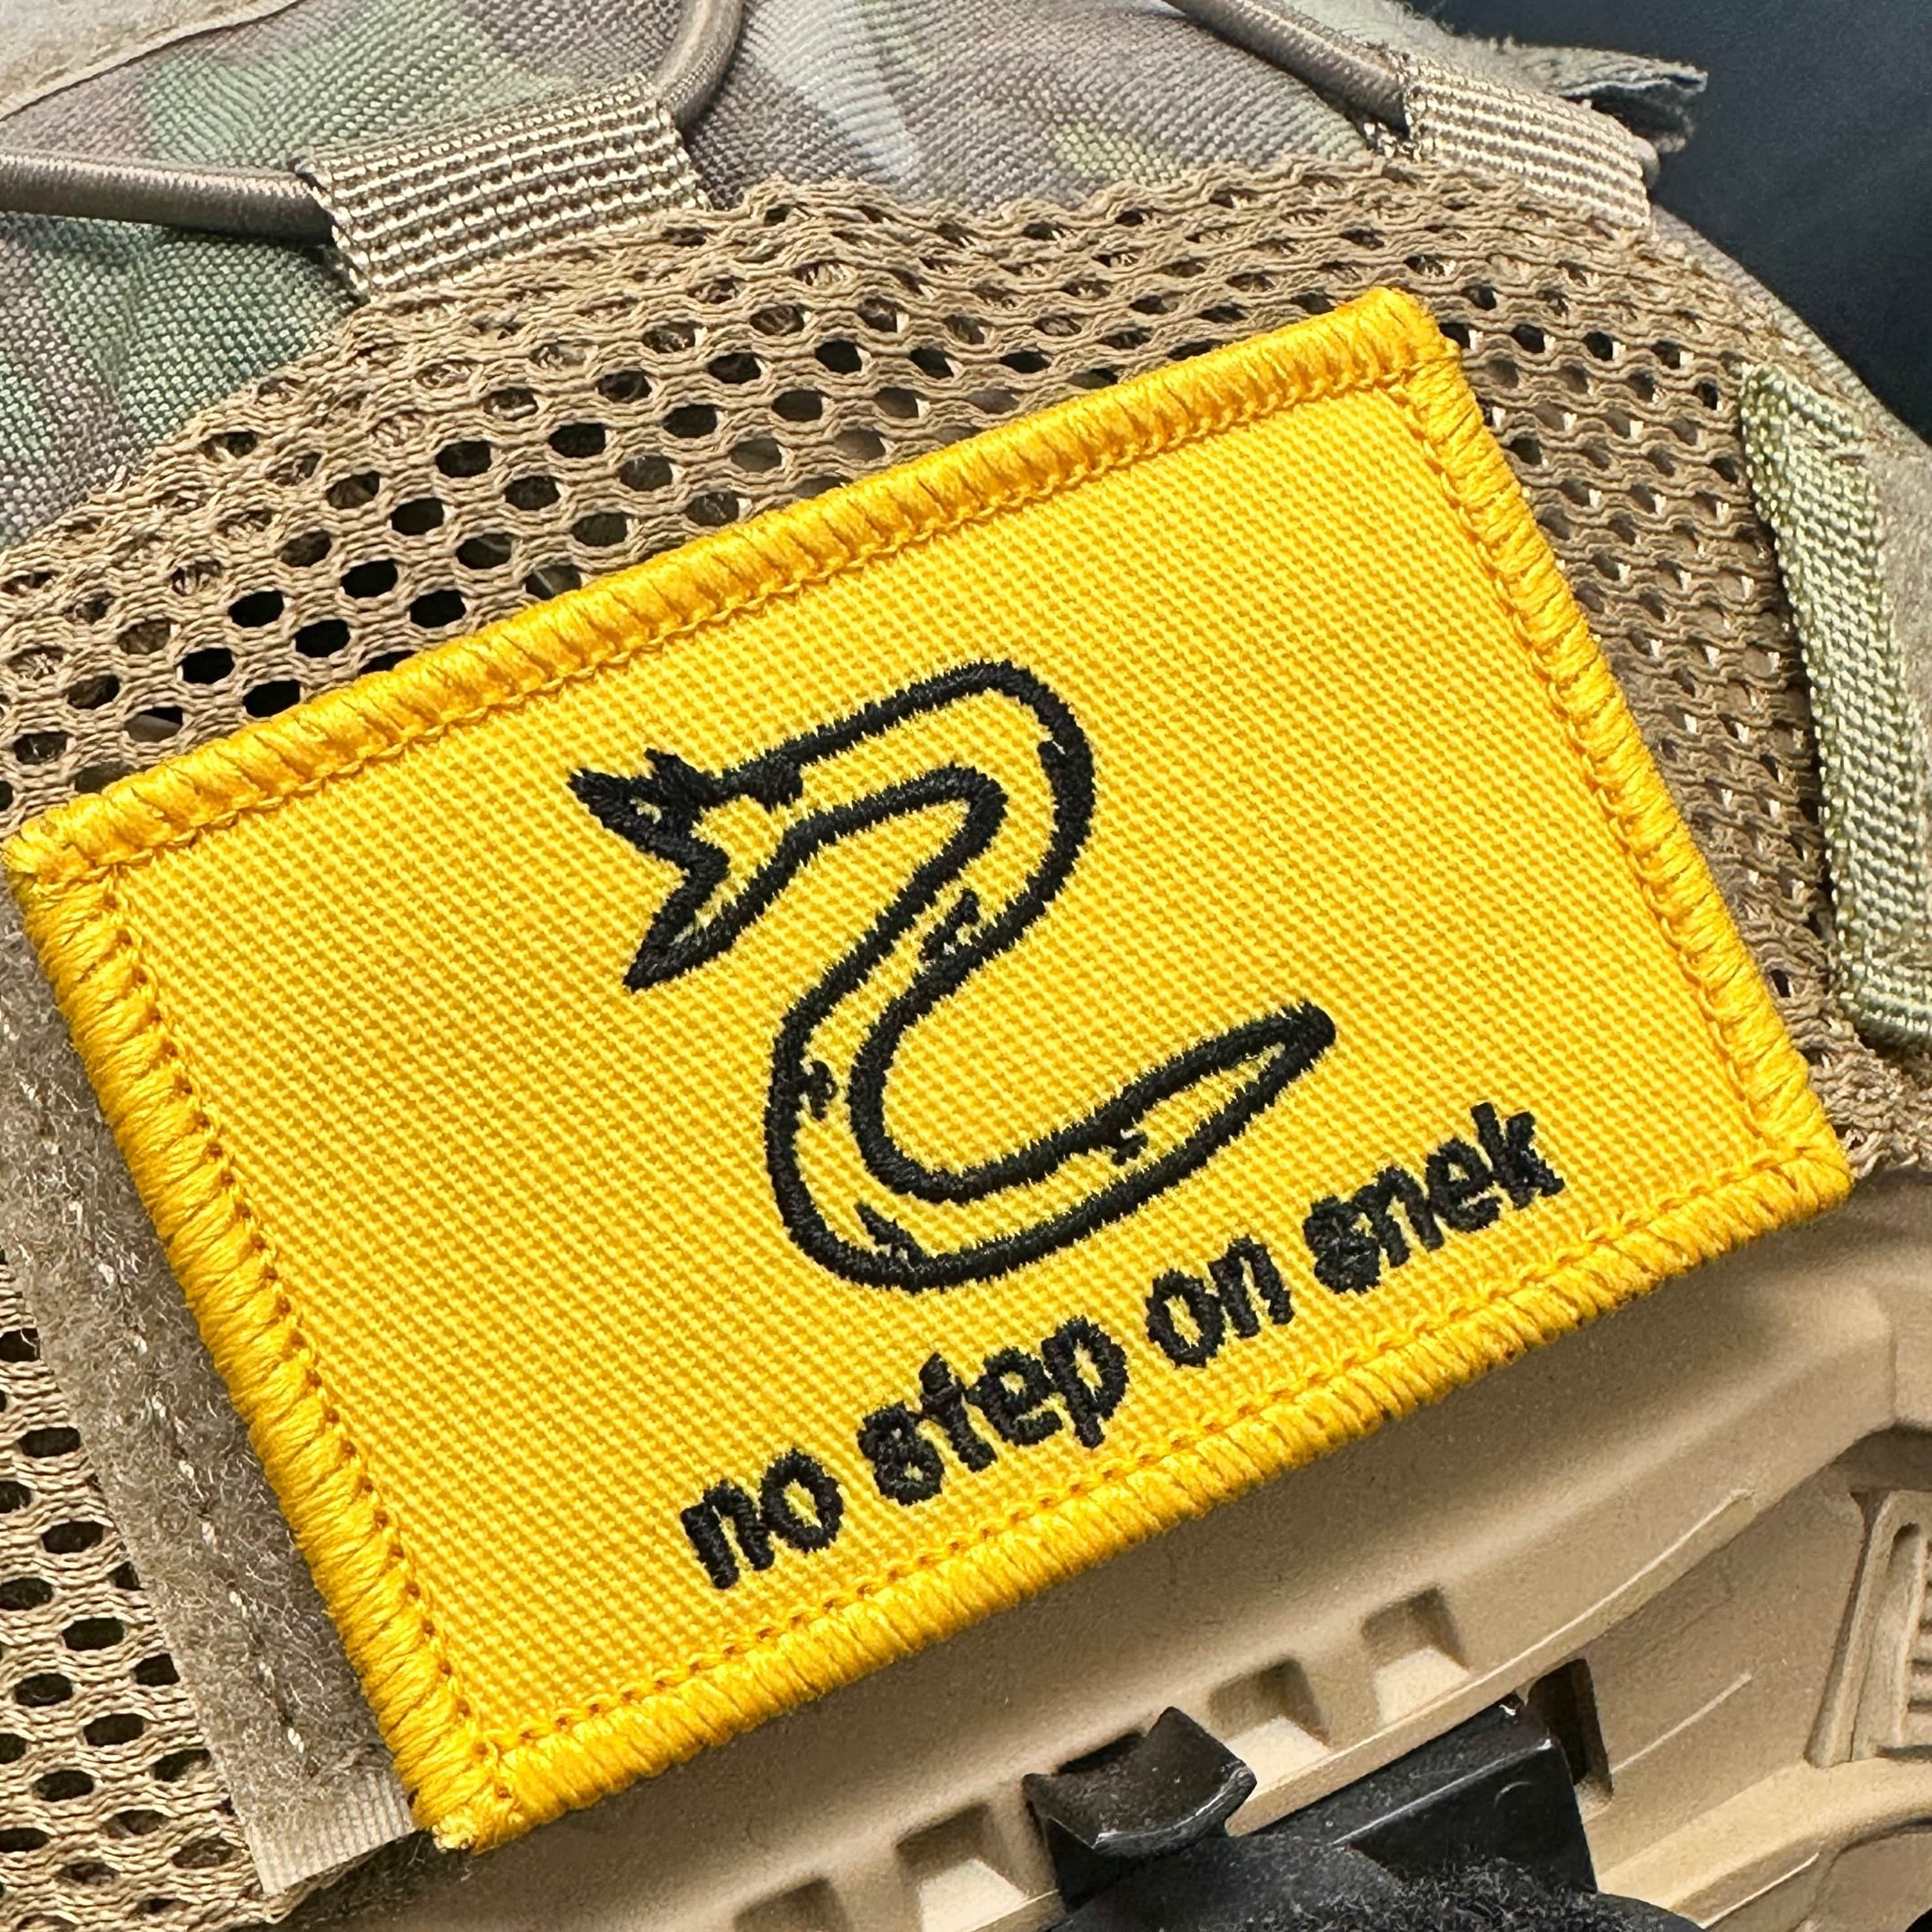 Tactical Gear Junkie Patches No Step On Snek - 2x3 Patch